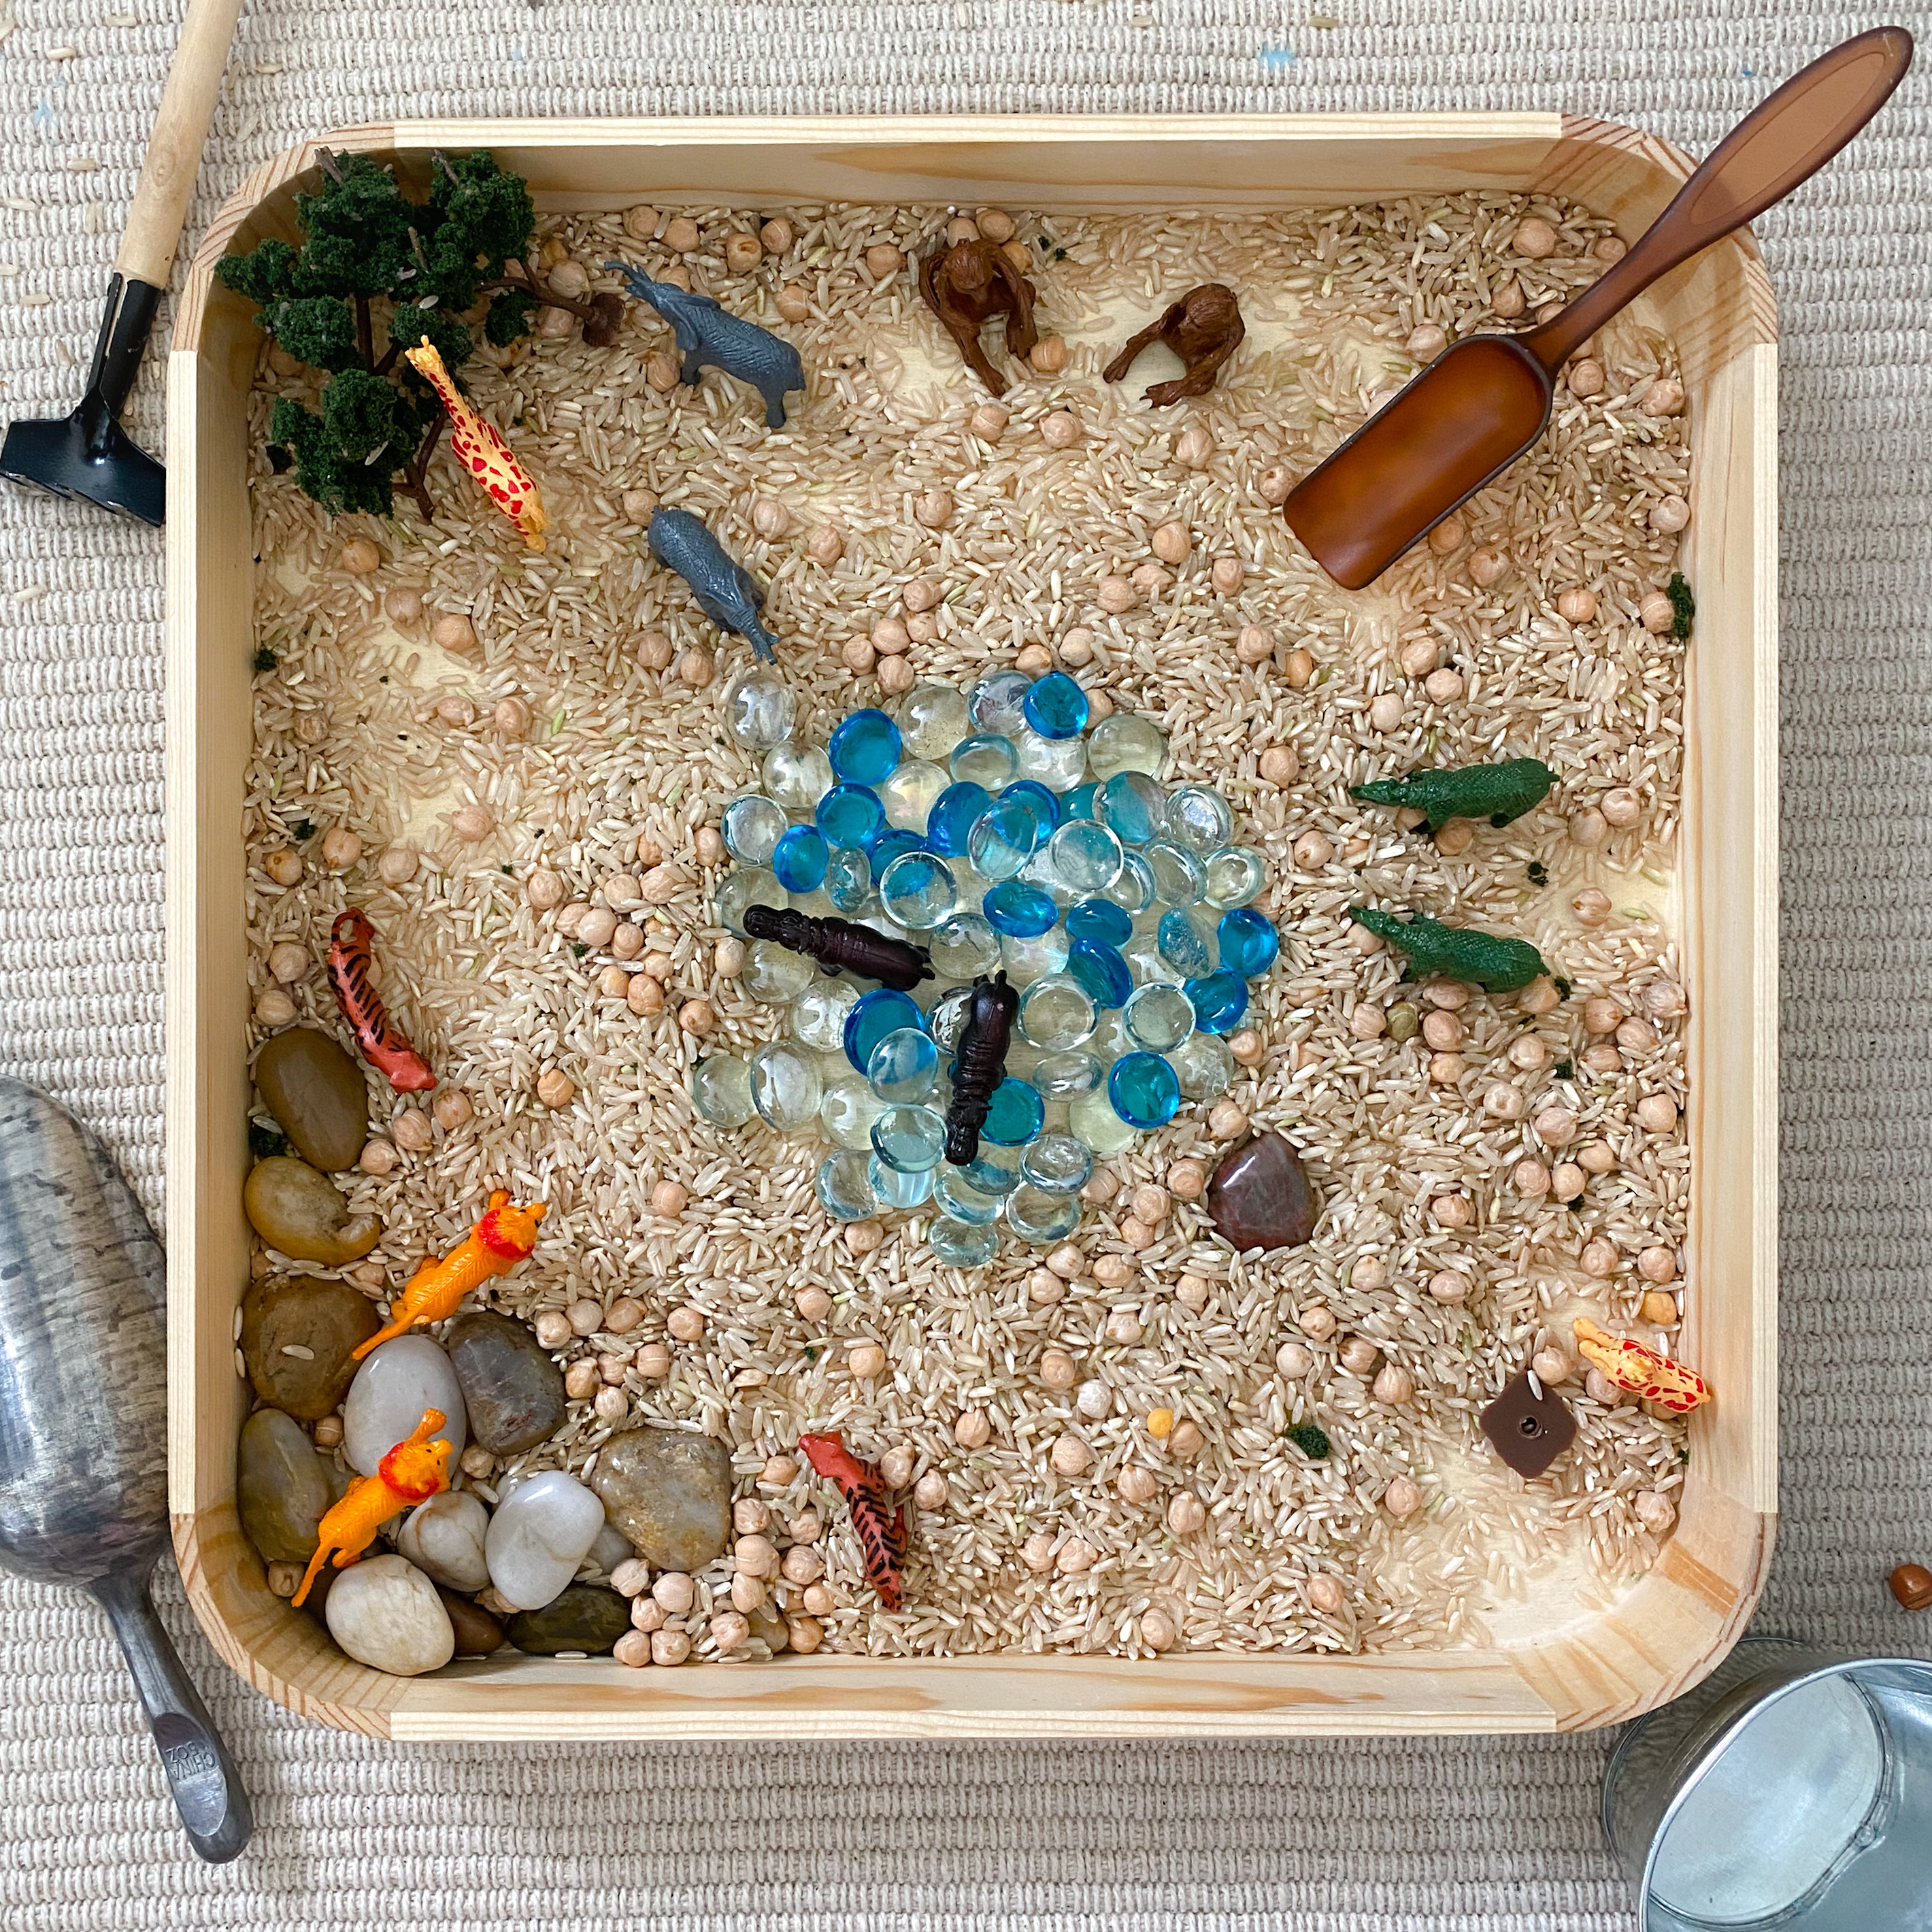 Top-down view of the safari bin with marbles, rice and safari animals arranged as if in the wild.